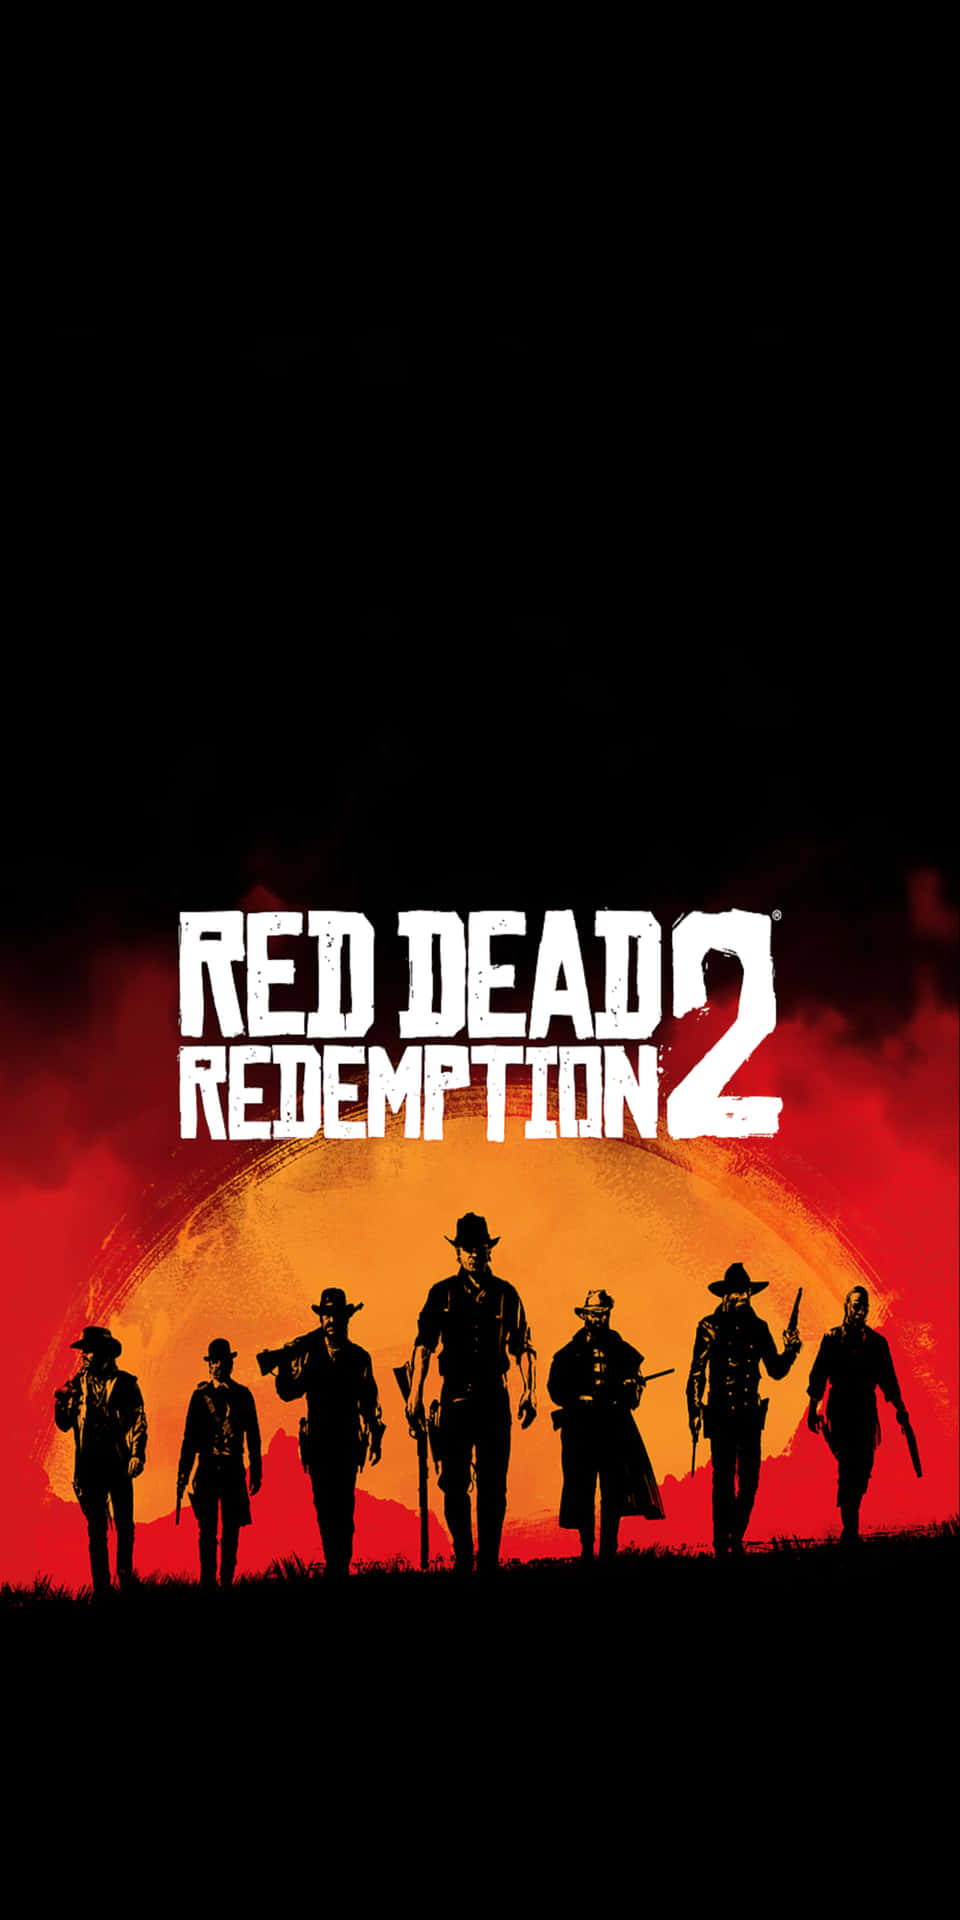 Pixel 3 Red Dead Redemption 2 Background Silhouettes Of Cowboys Poster